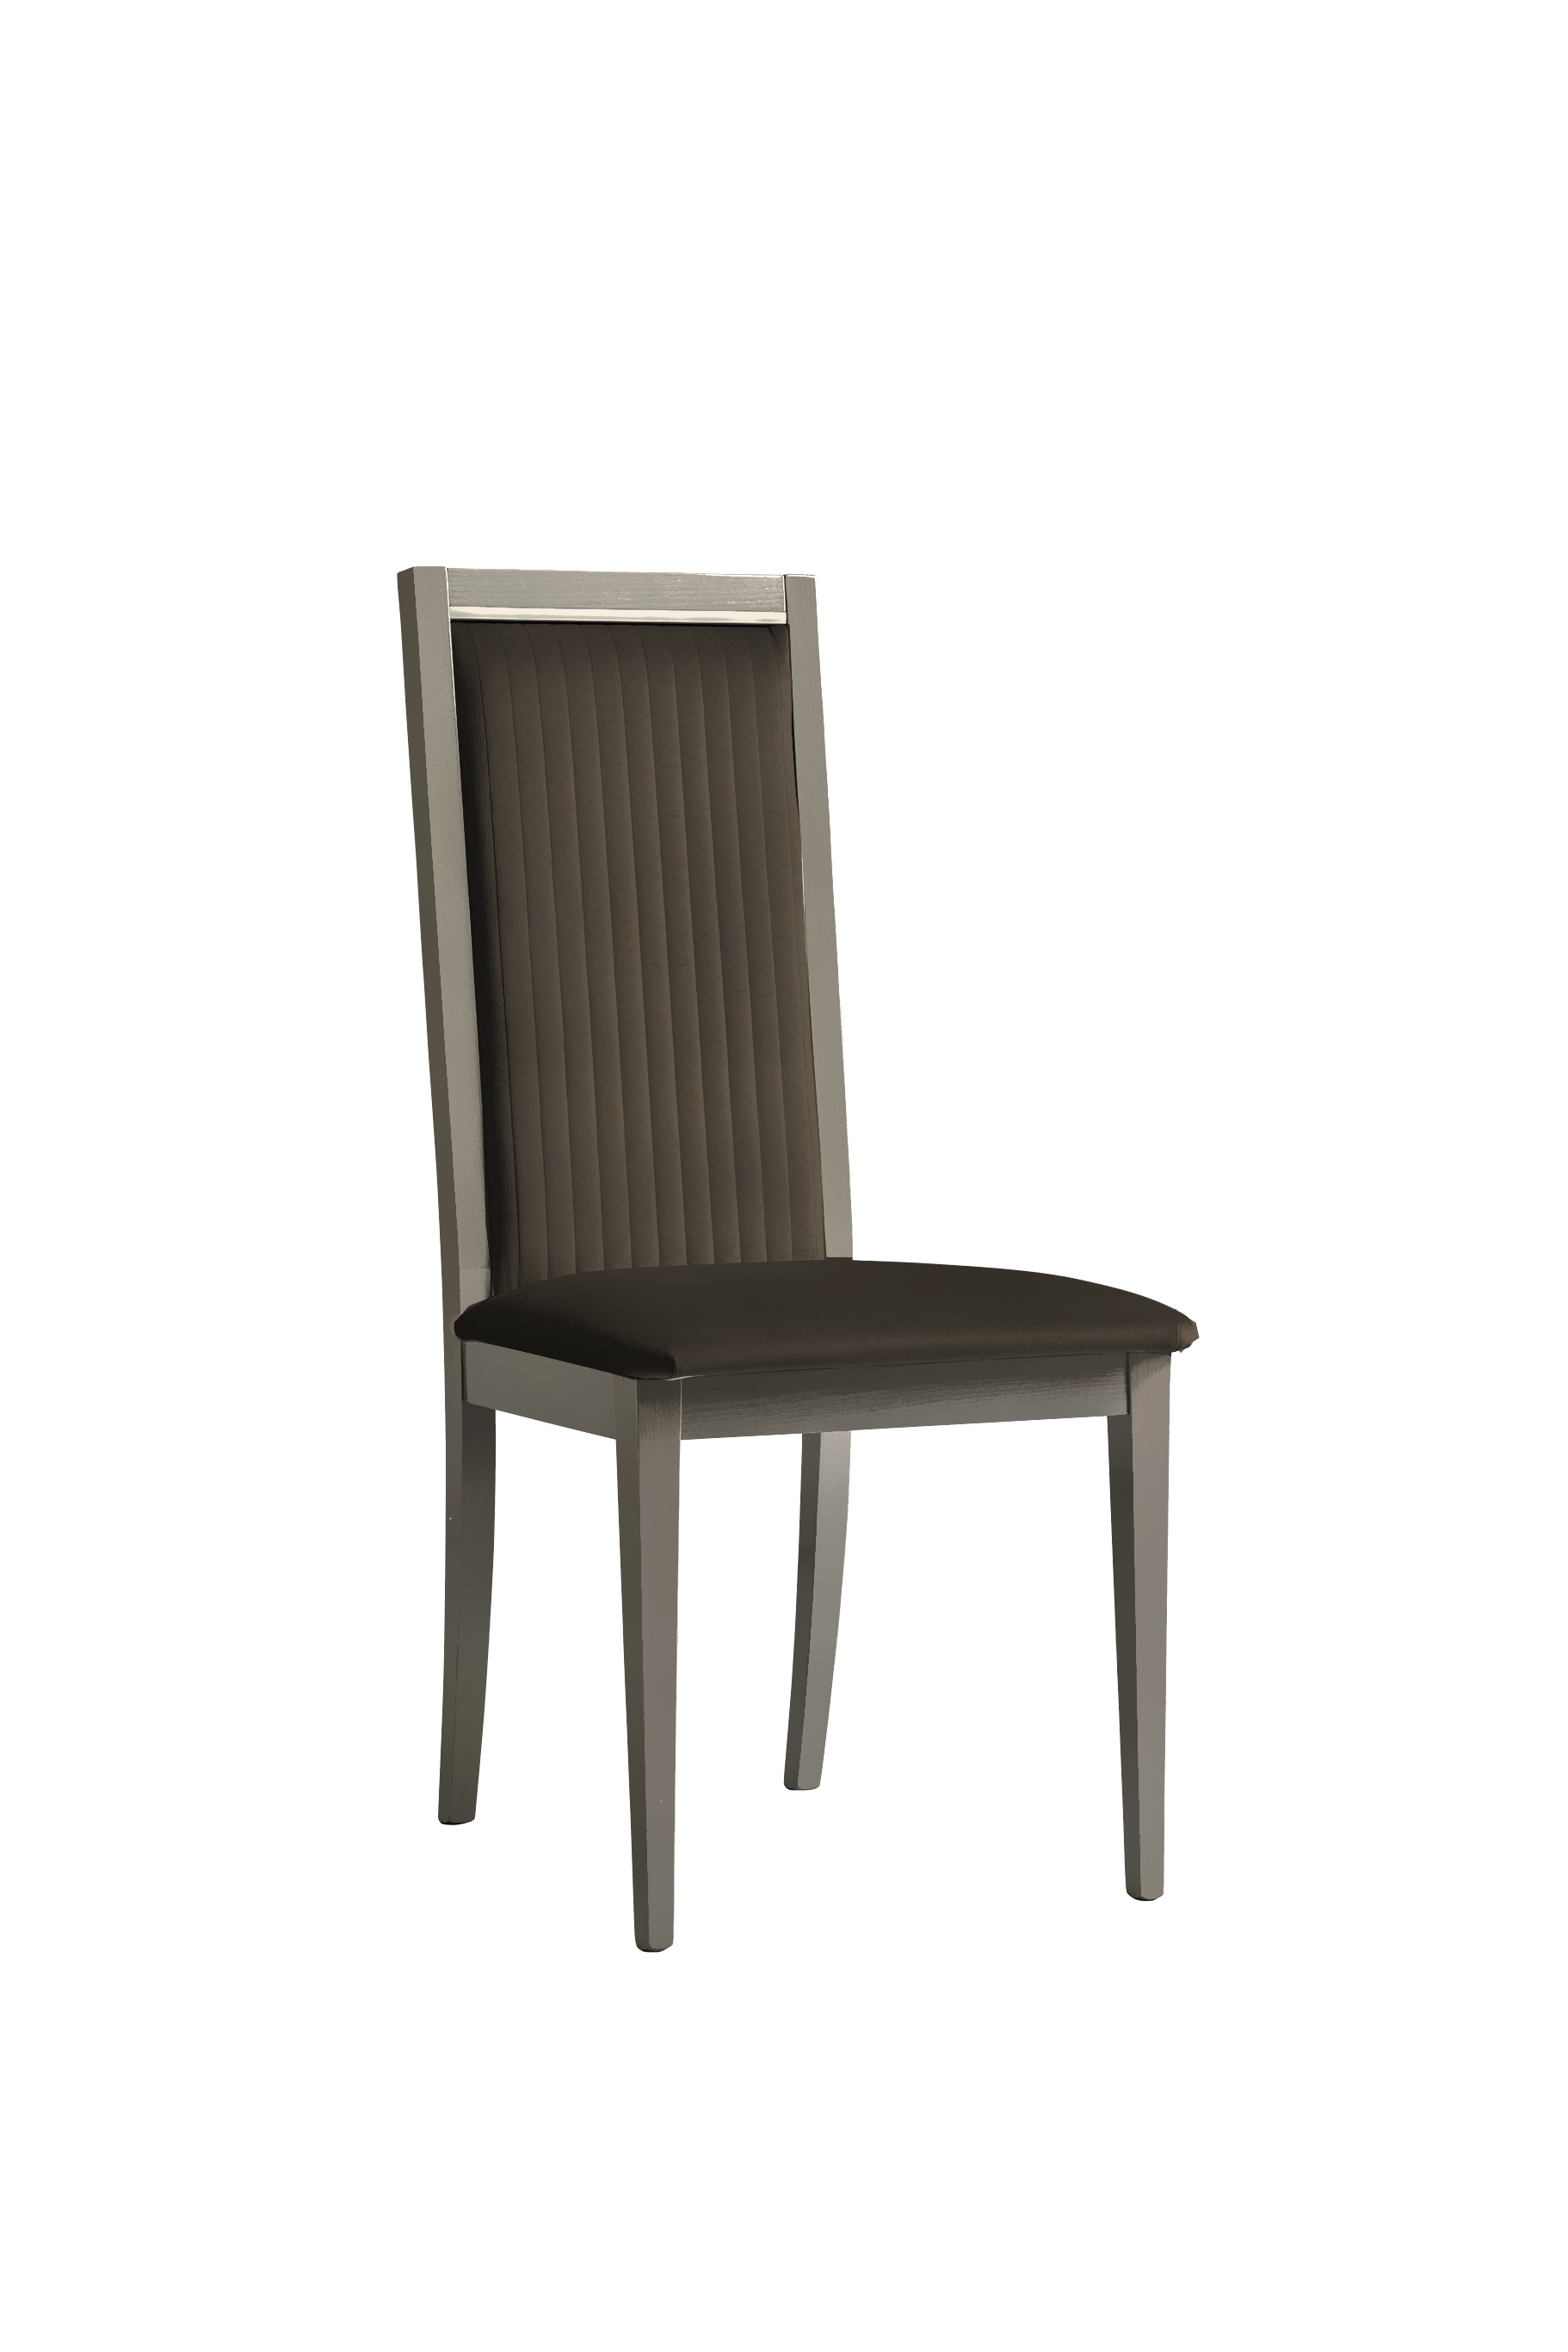 CHAIR ROMA STRIPE FRONT time 800